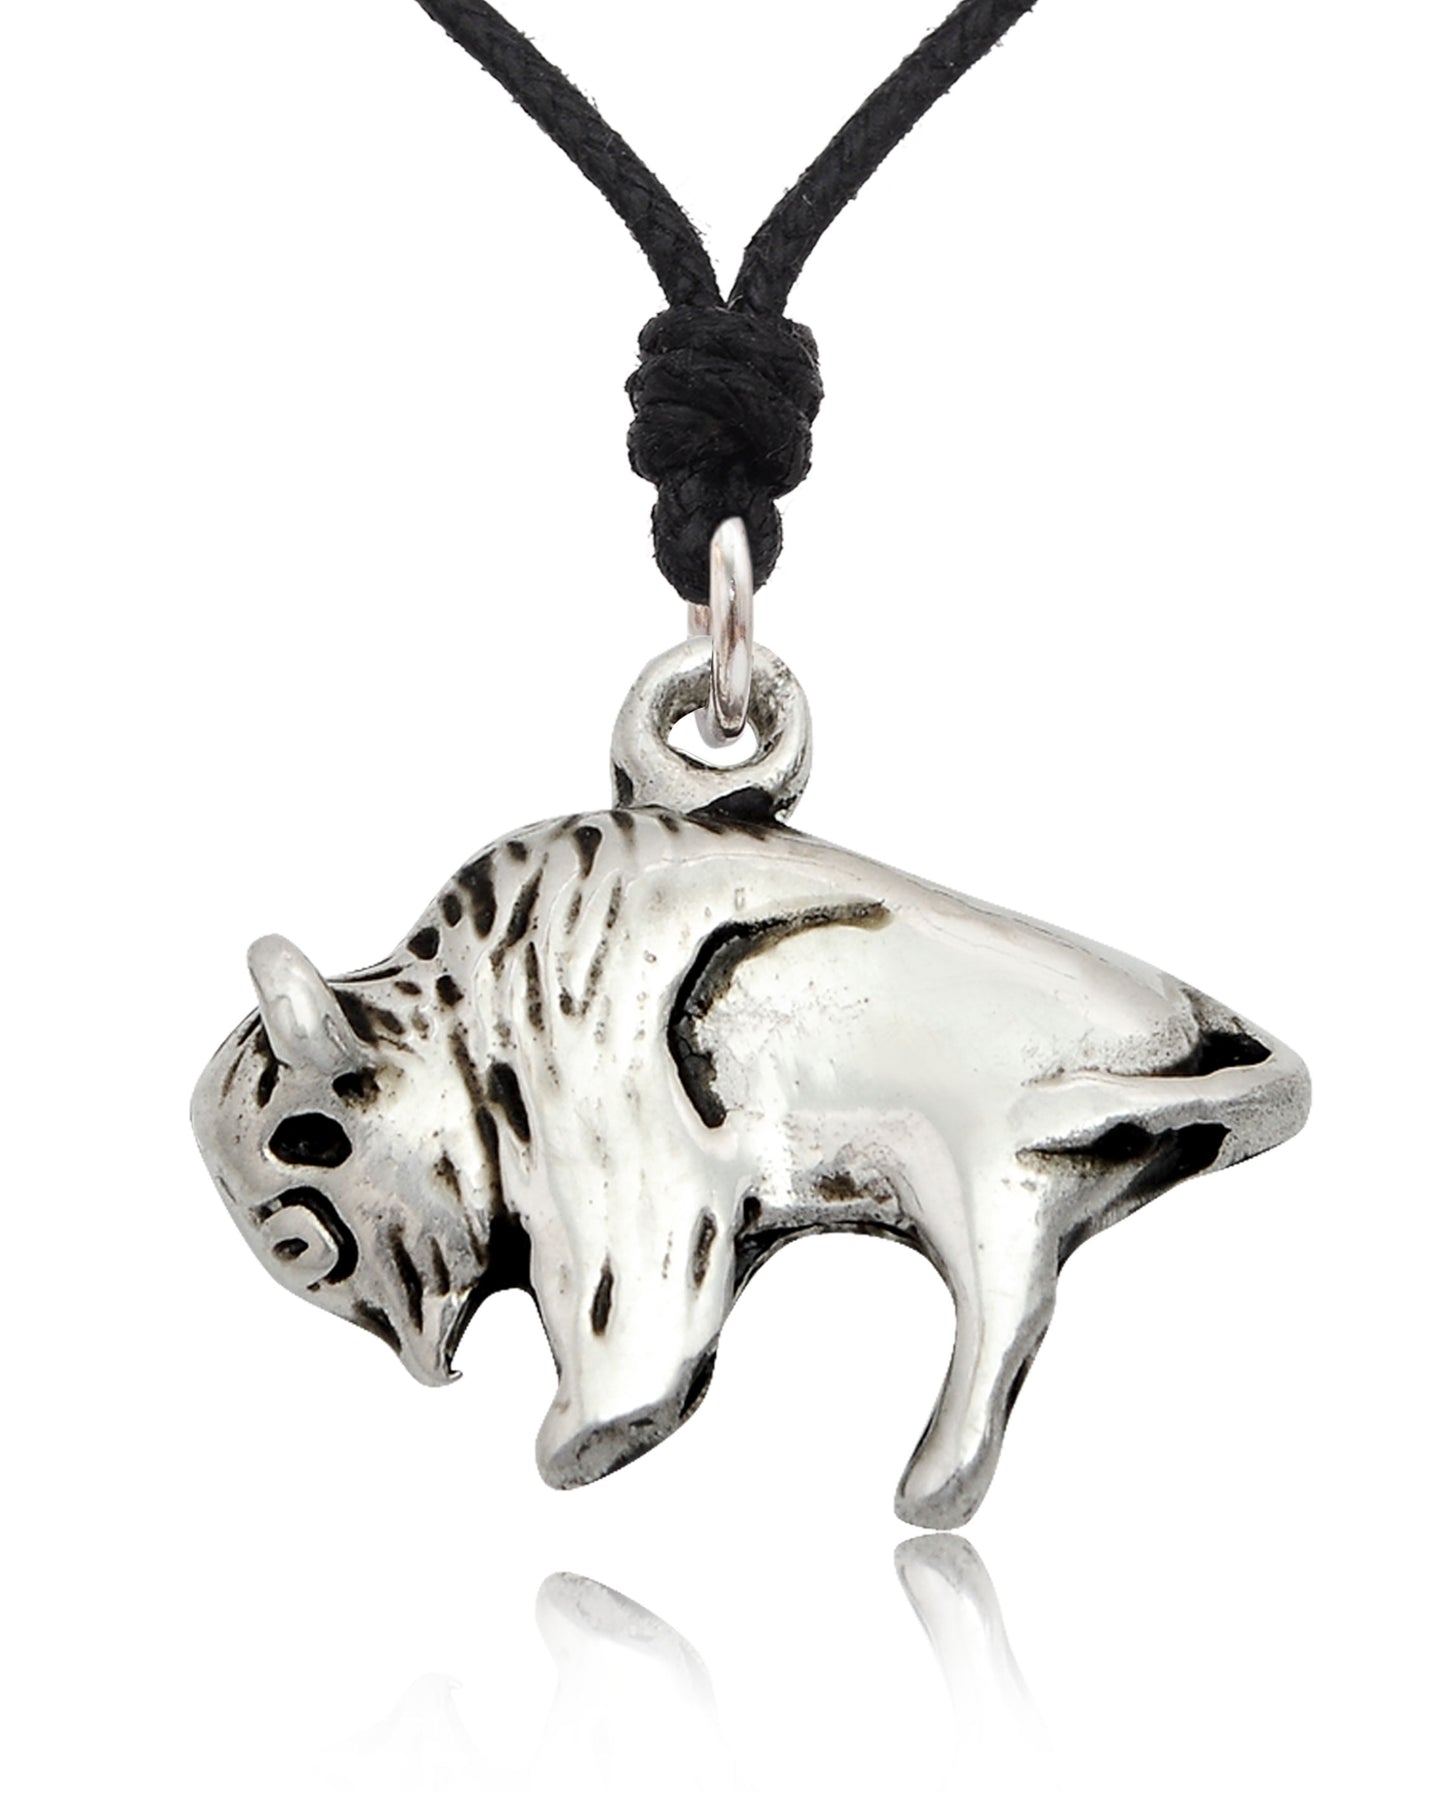 Bison Buffalo Silver Pewter Charm Necklace Pendant Jewelry With Cotton Cord